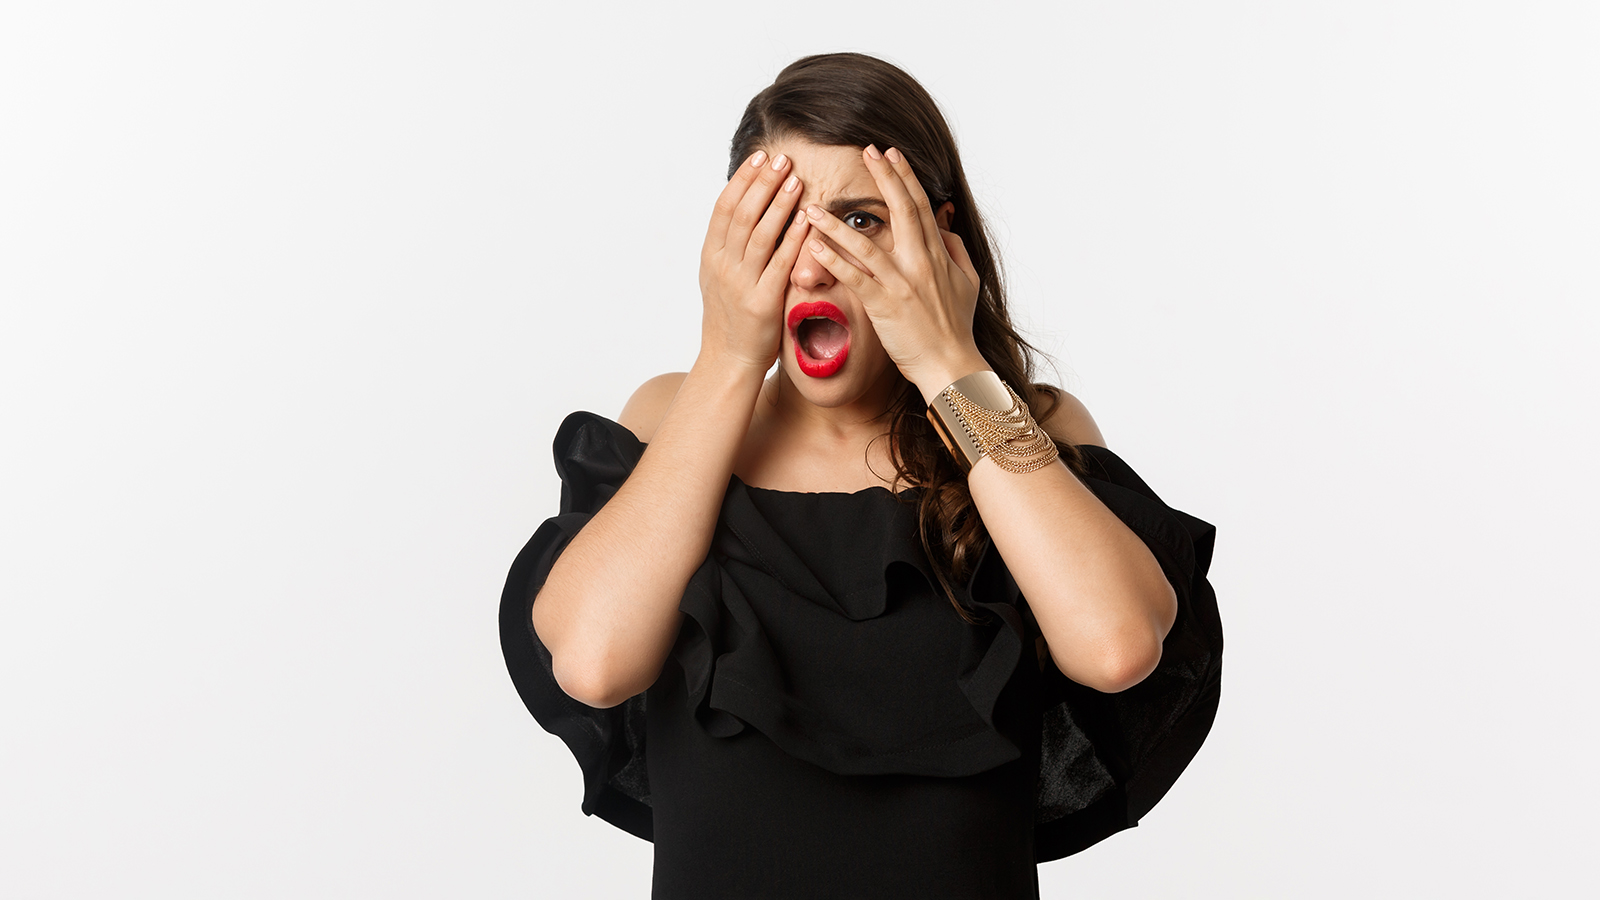 Fashion and beauty. Shocked young woman in black dress covering eyes, peeking through fingers at something embarrassing, cringe, standing over white background